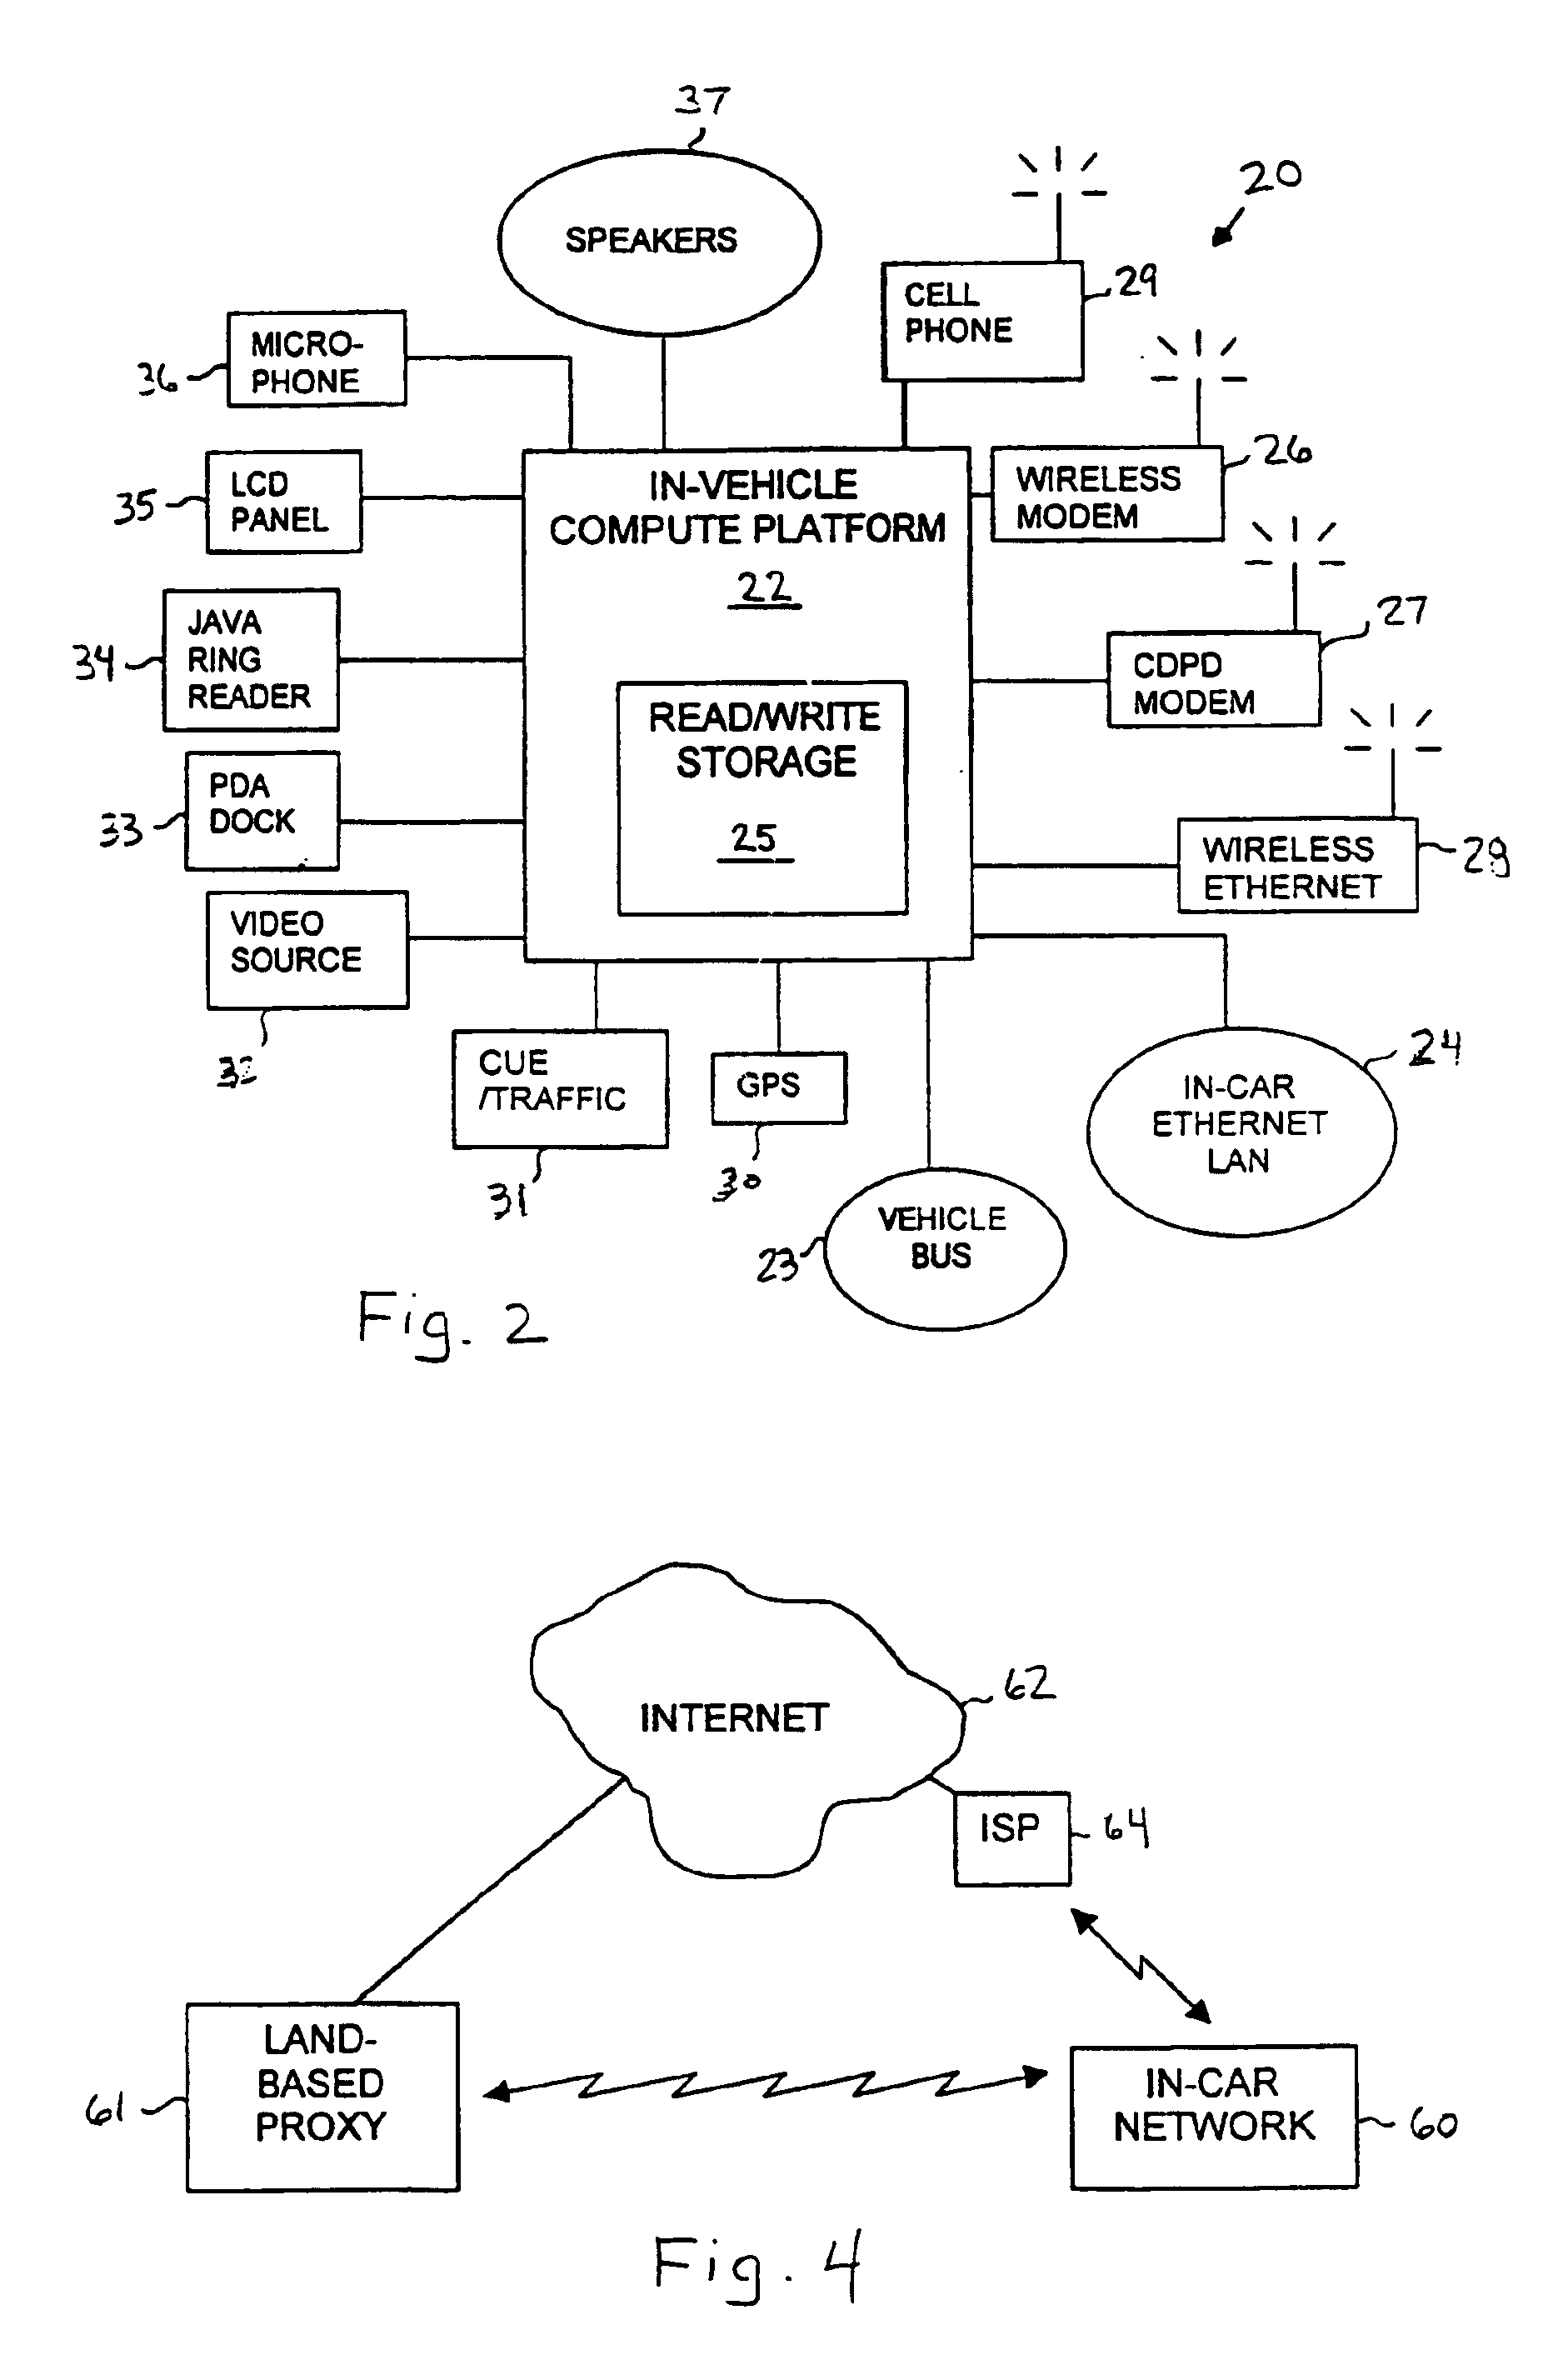 System and method for providing software upgrades to a vehicle